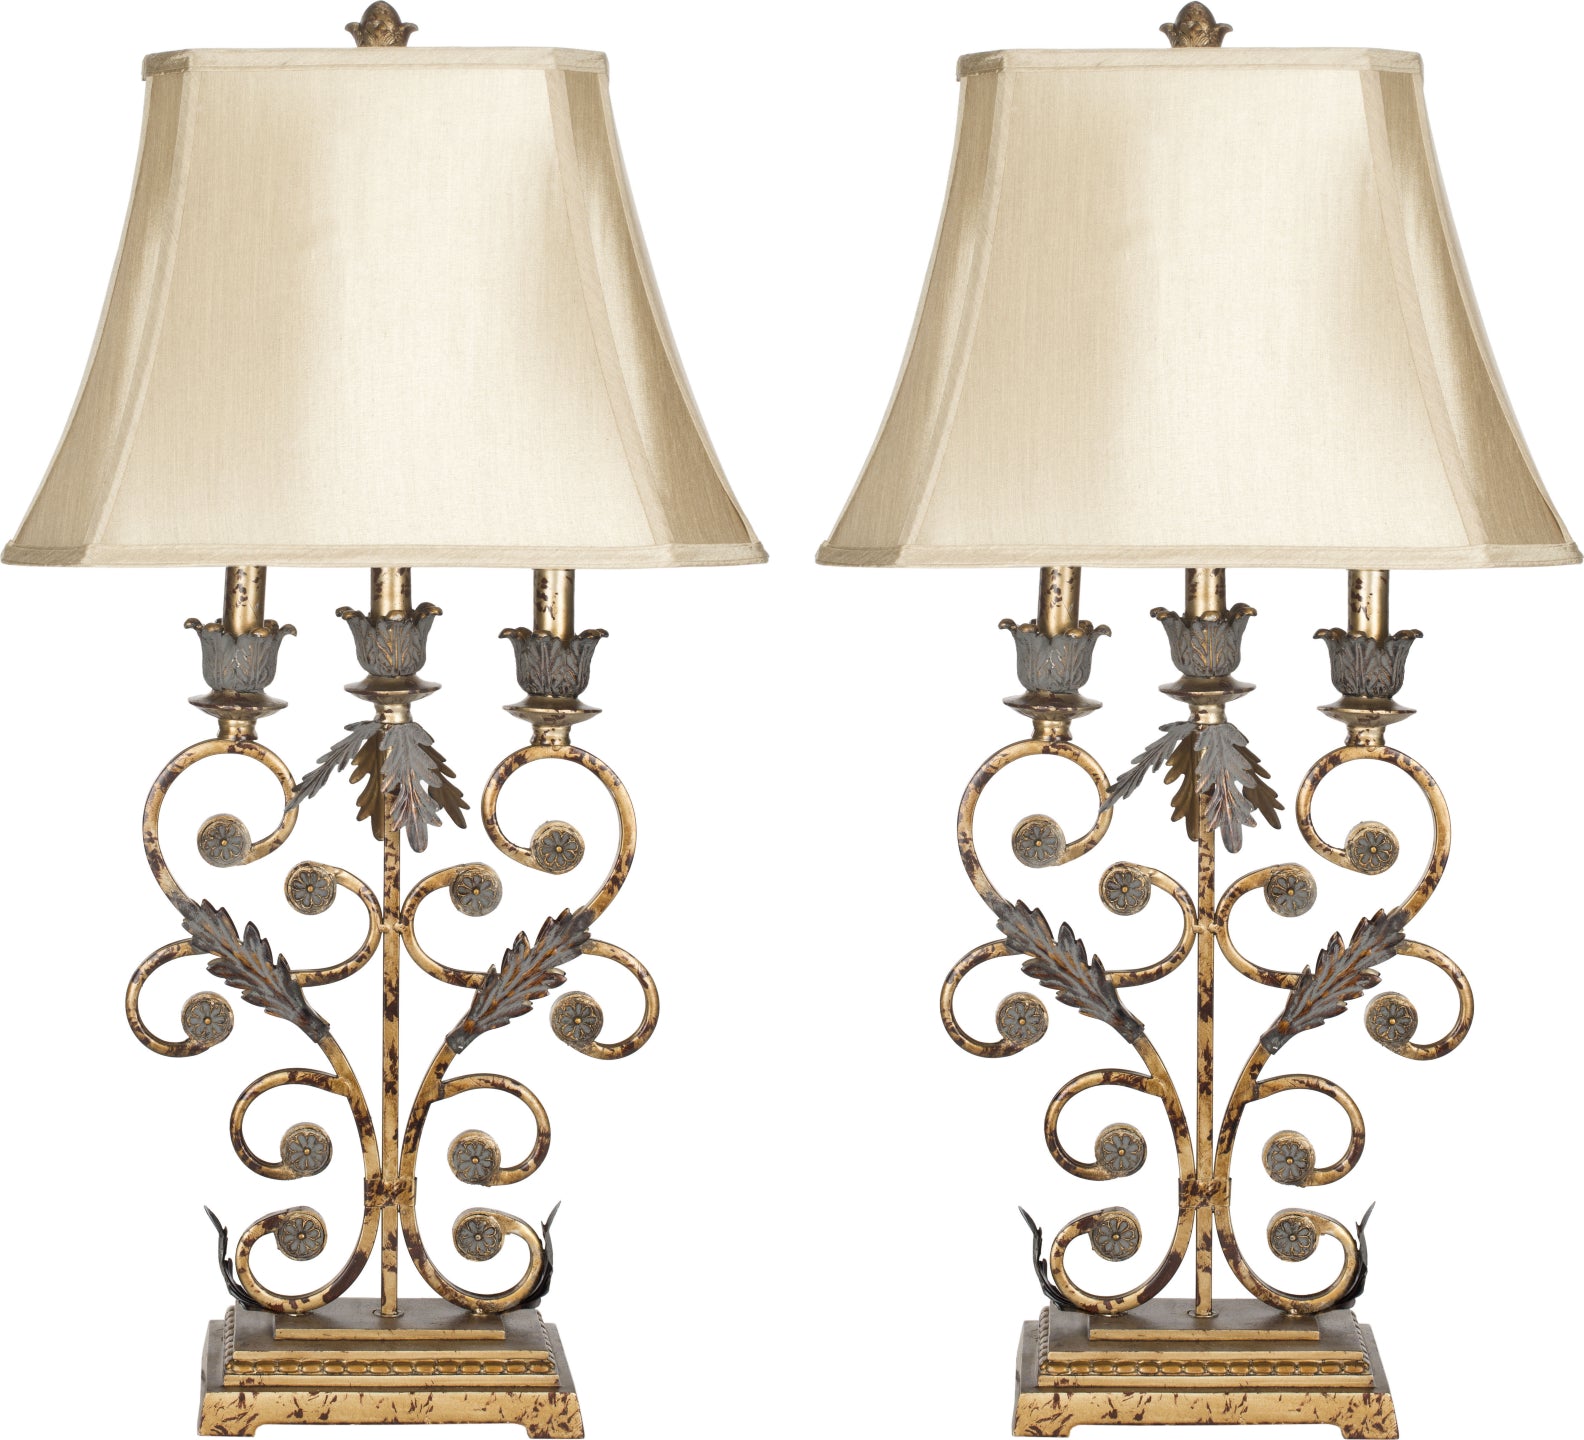 Safavieh Lucia 325-Inch H Table Lamp Gold Mirror main image